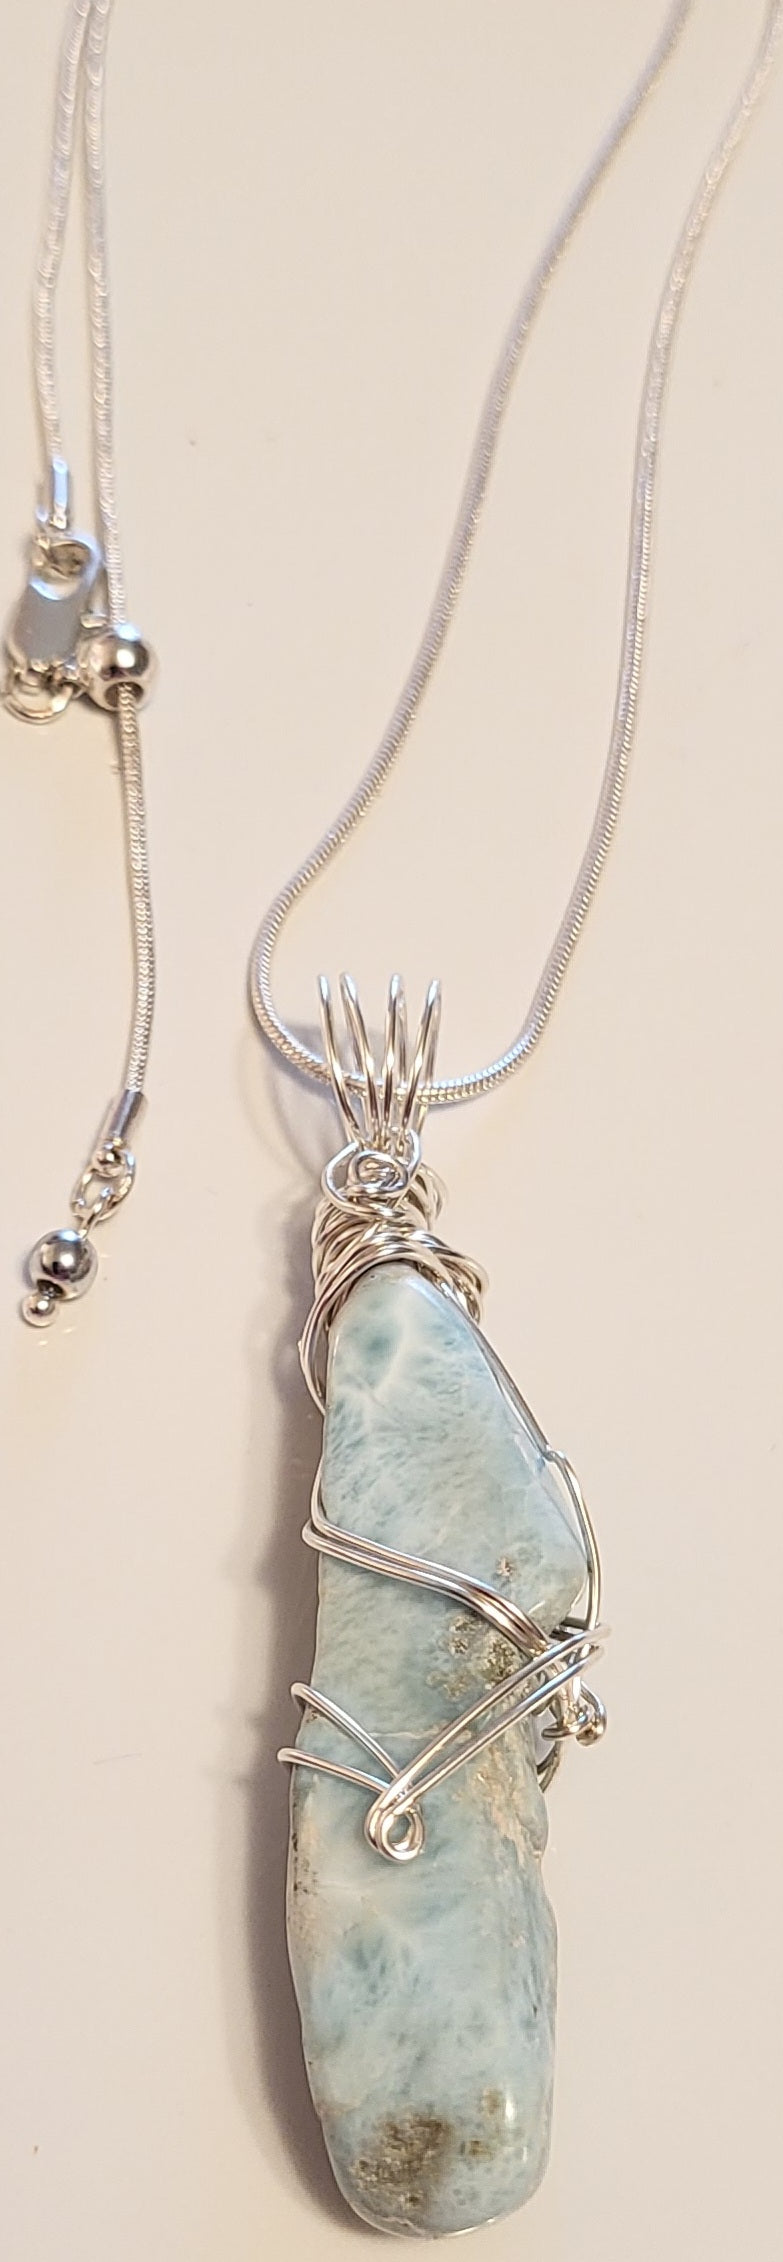 Genuine Larimar Stone Necklace, one of a kind